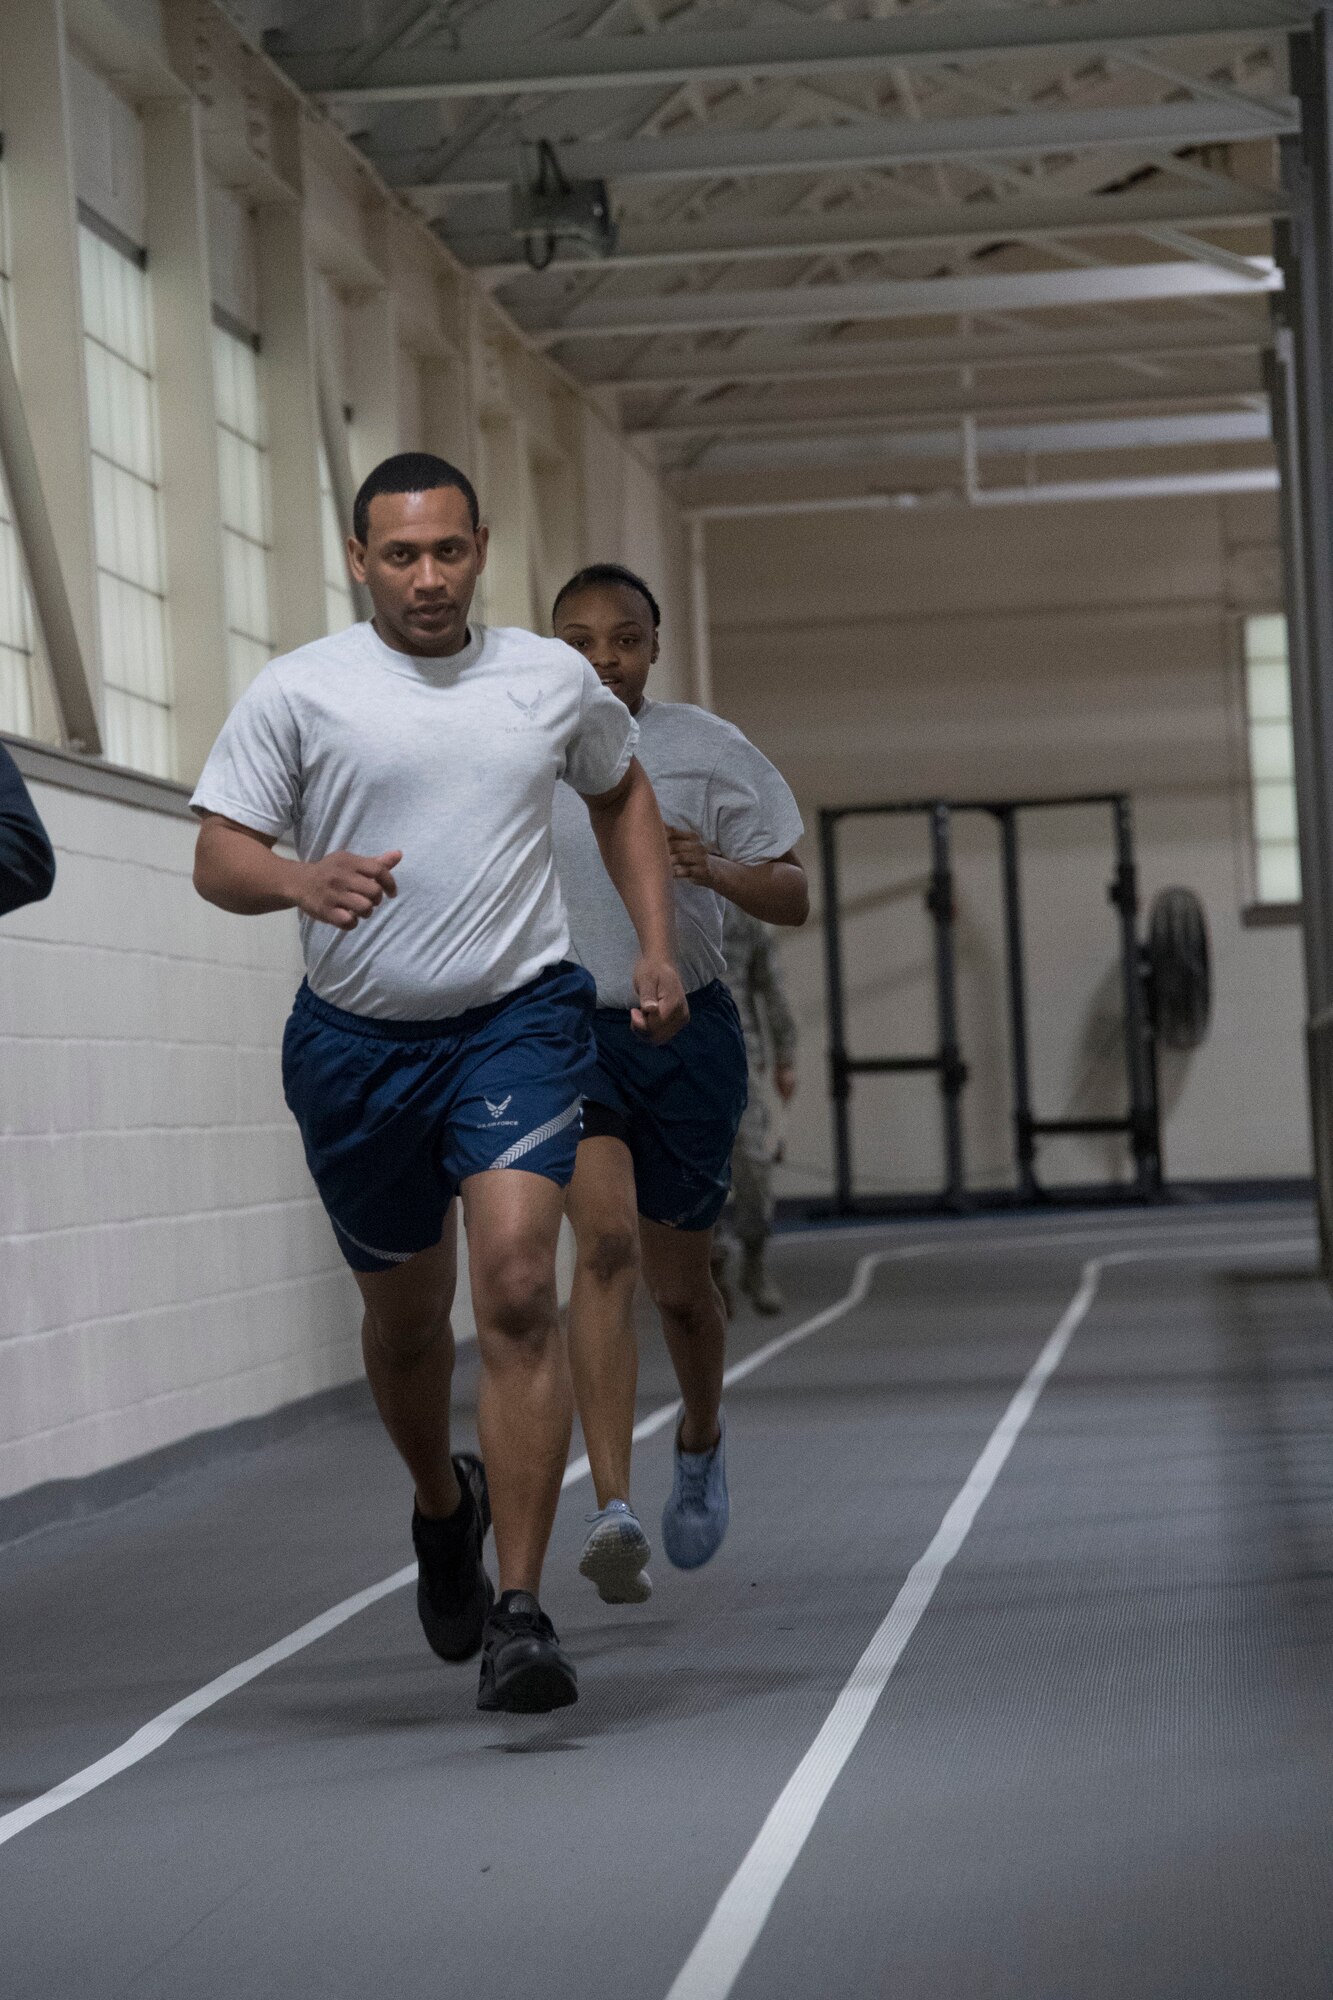 Photo of Airmen running on an indoor track